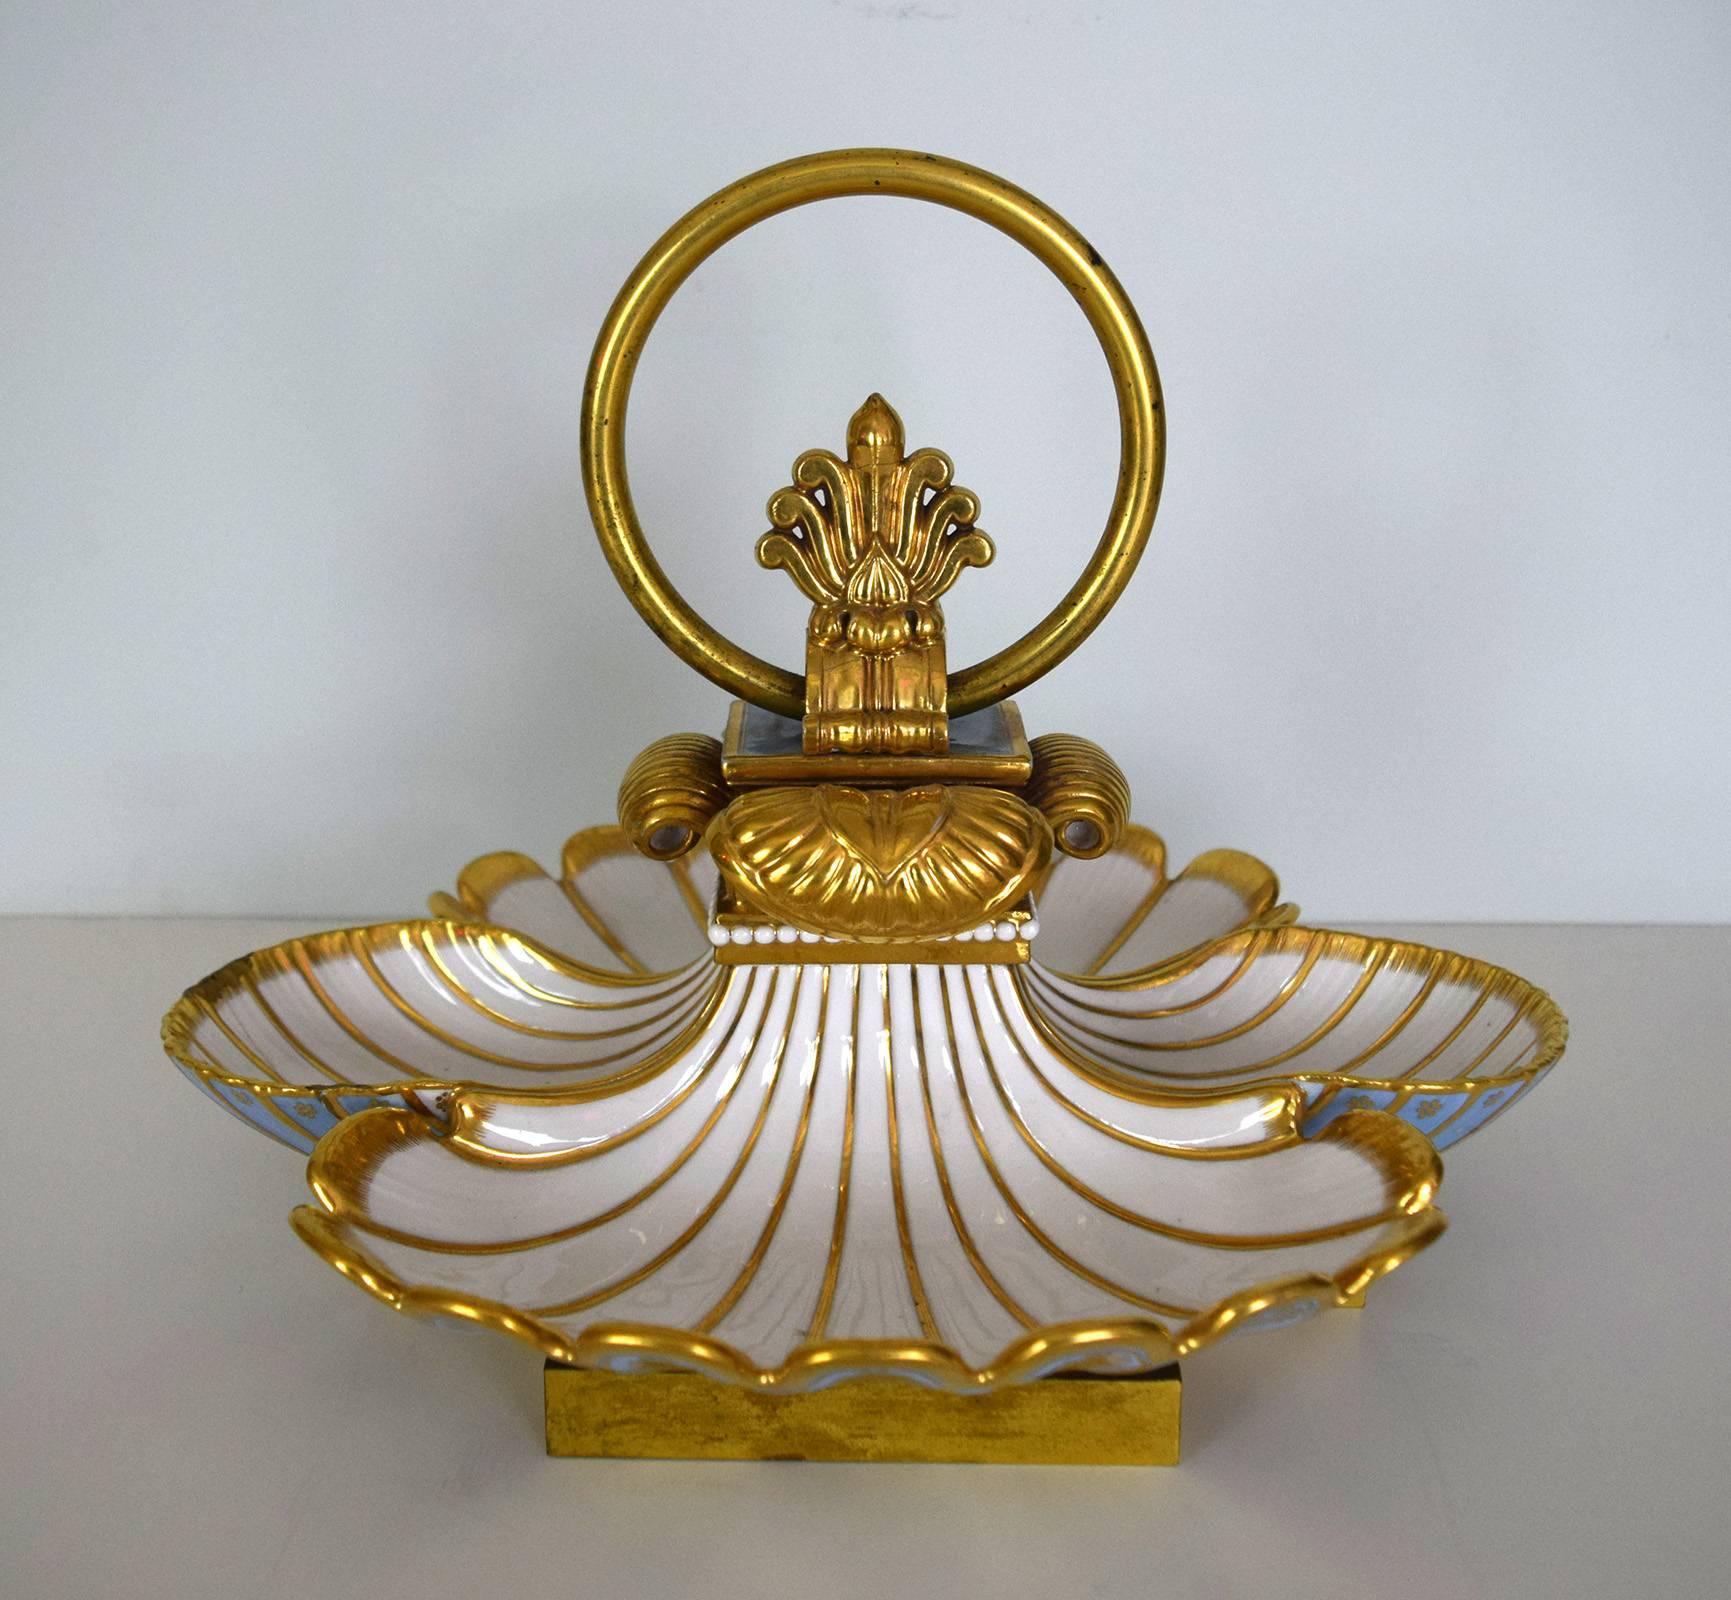 This spectacular sweetmeat or candy dish comes from the Sevrès dinner service made in 1832 for King Louis-Philippe's chateaux of Compiègne and Saint-Cloud. The service was supplied to these royal households from 1832 to 1847, but the "32"